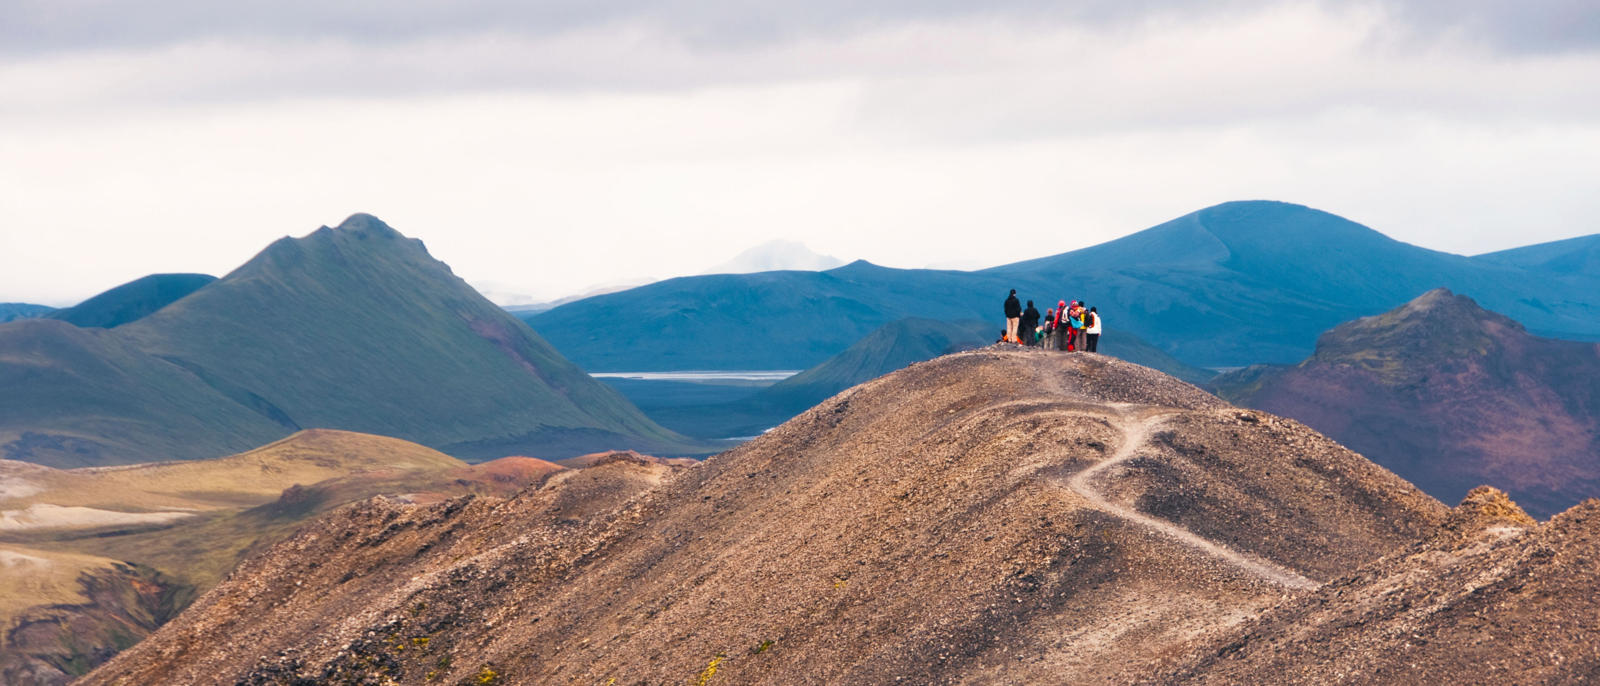 A group of people on a mountain at Landmannalaugar in Iceland